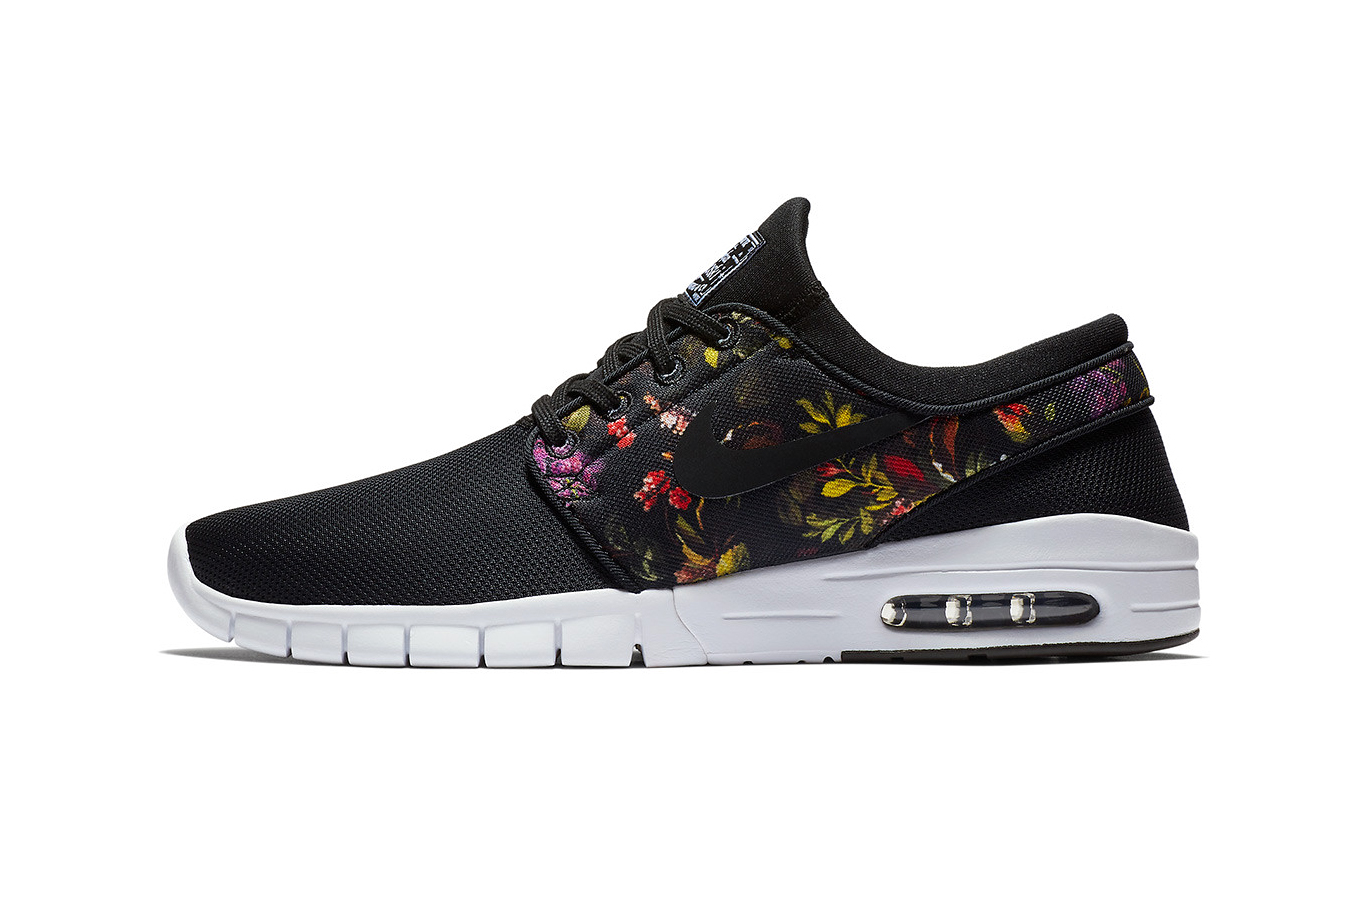 text Previously Dislike Nike SB Janoski Max Receives New Floral Colorway | Hypebeast